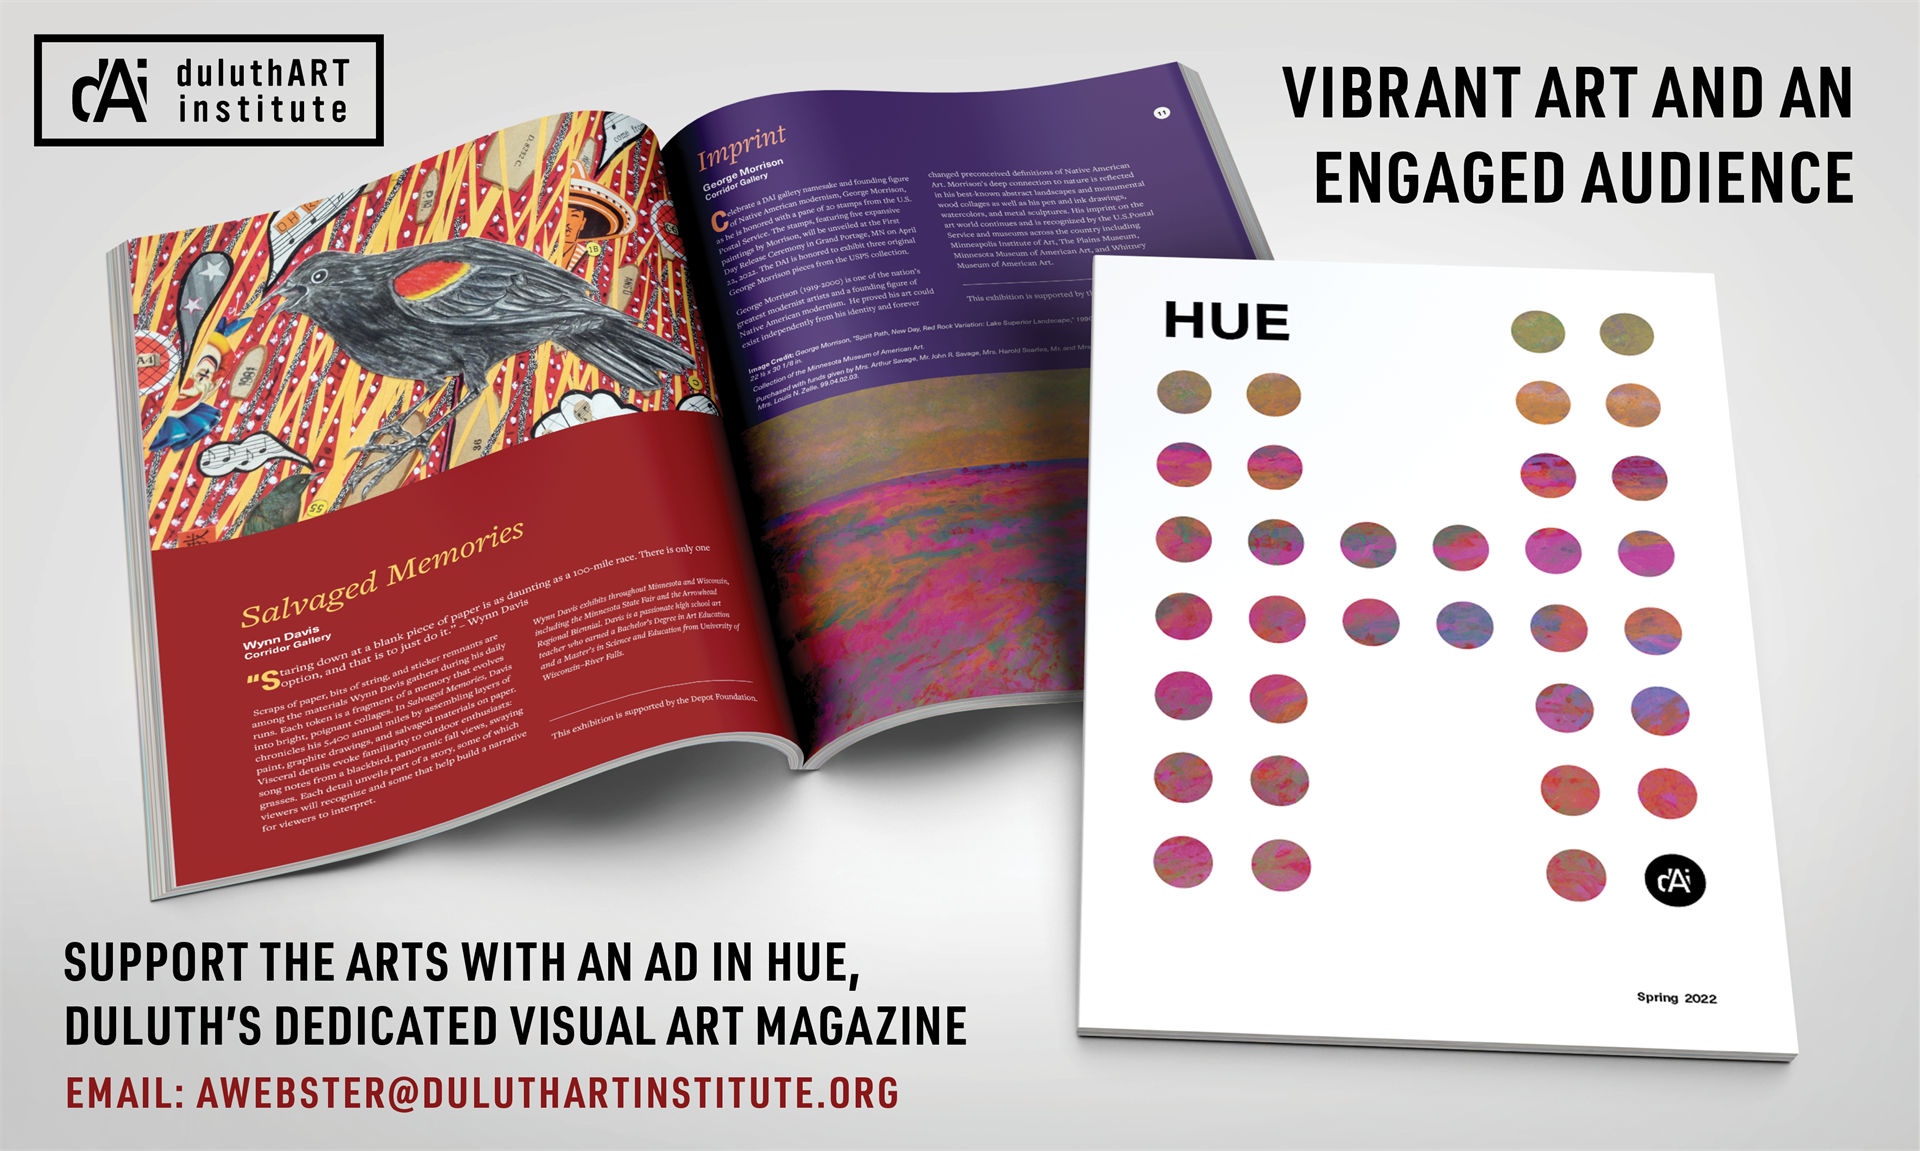 Vibrant art and an engaged audience. Support the arts with an ad in HUE, Duluth's dedicated visual art magazine. Email: awebster@duluthartinstitute.org